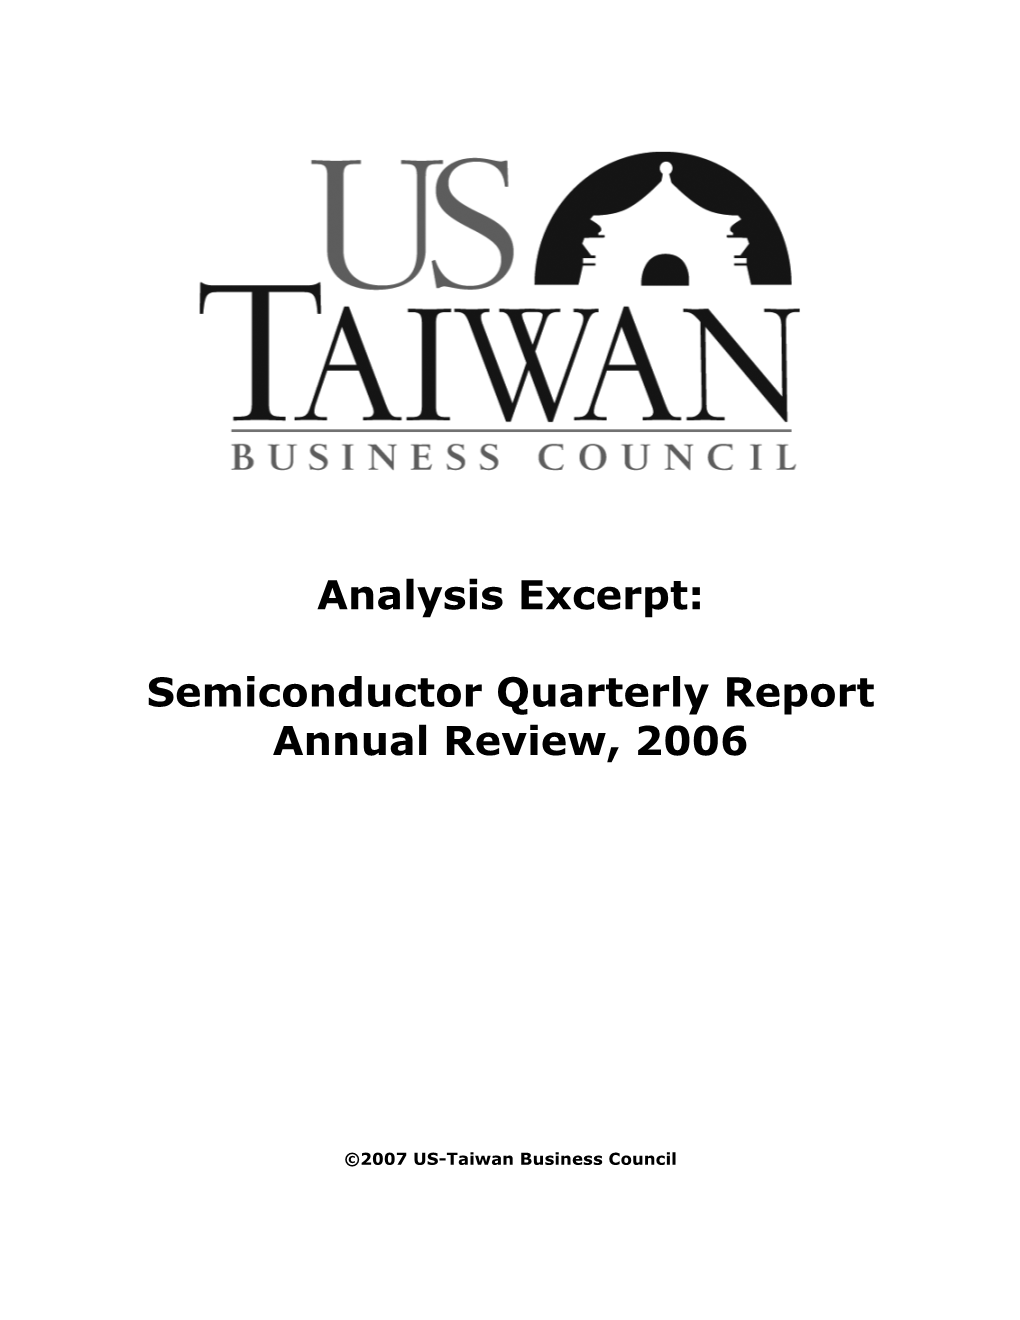 Semiconductor Quarterly Report, Annual Review 2006